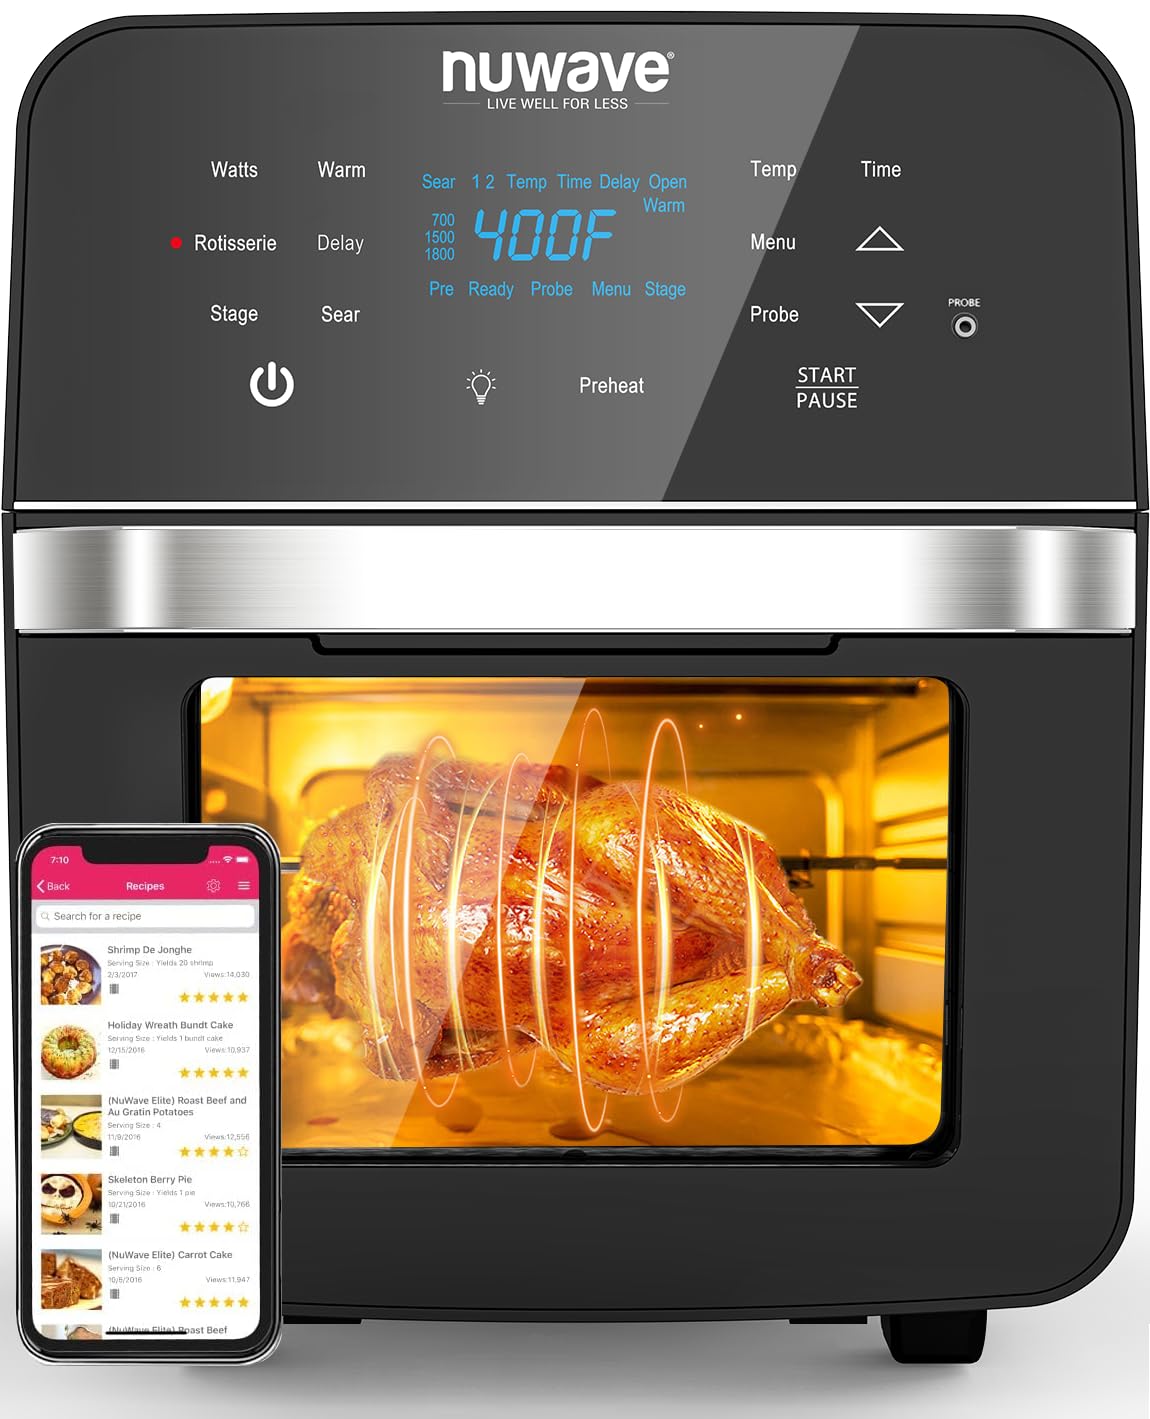 Nuwave Brio Air Fryer Oven, 15.5Qt X-Large Family Size, SS Rotisserie Basket &-Skewer Kit, Powerful 1800W, 50F-425F Temp Controls, Integrated Smart Thermometer